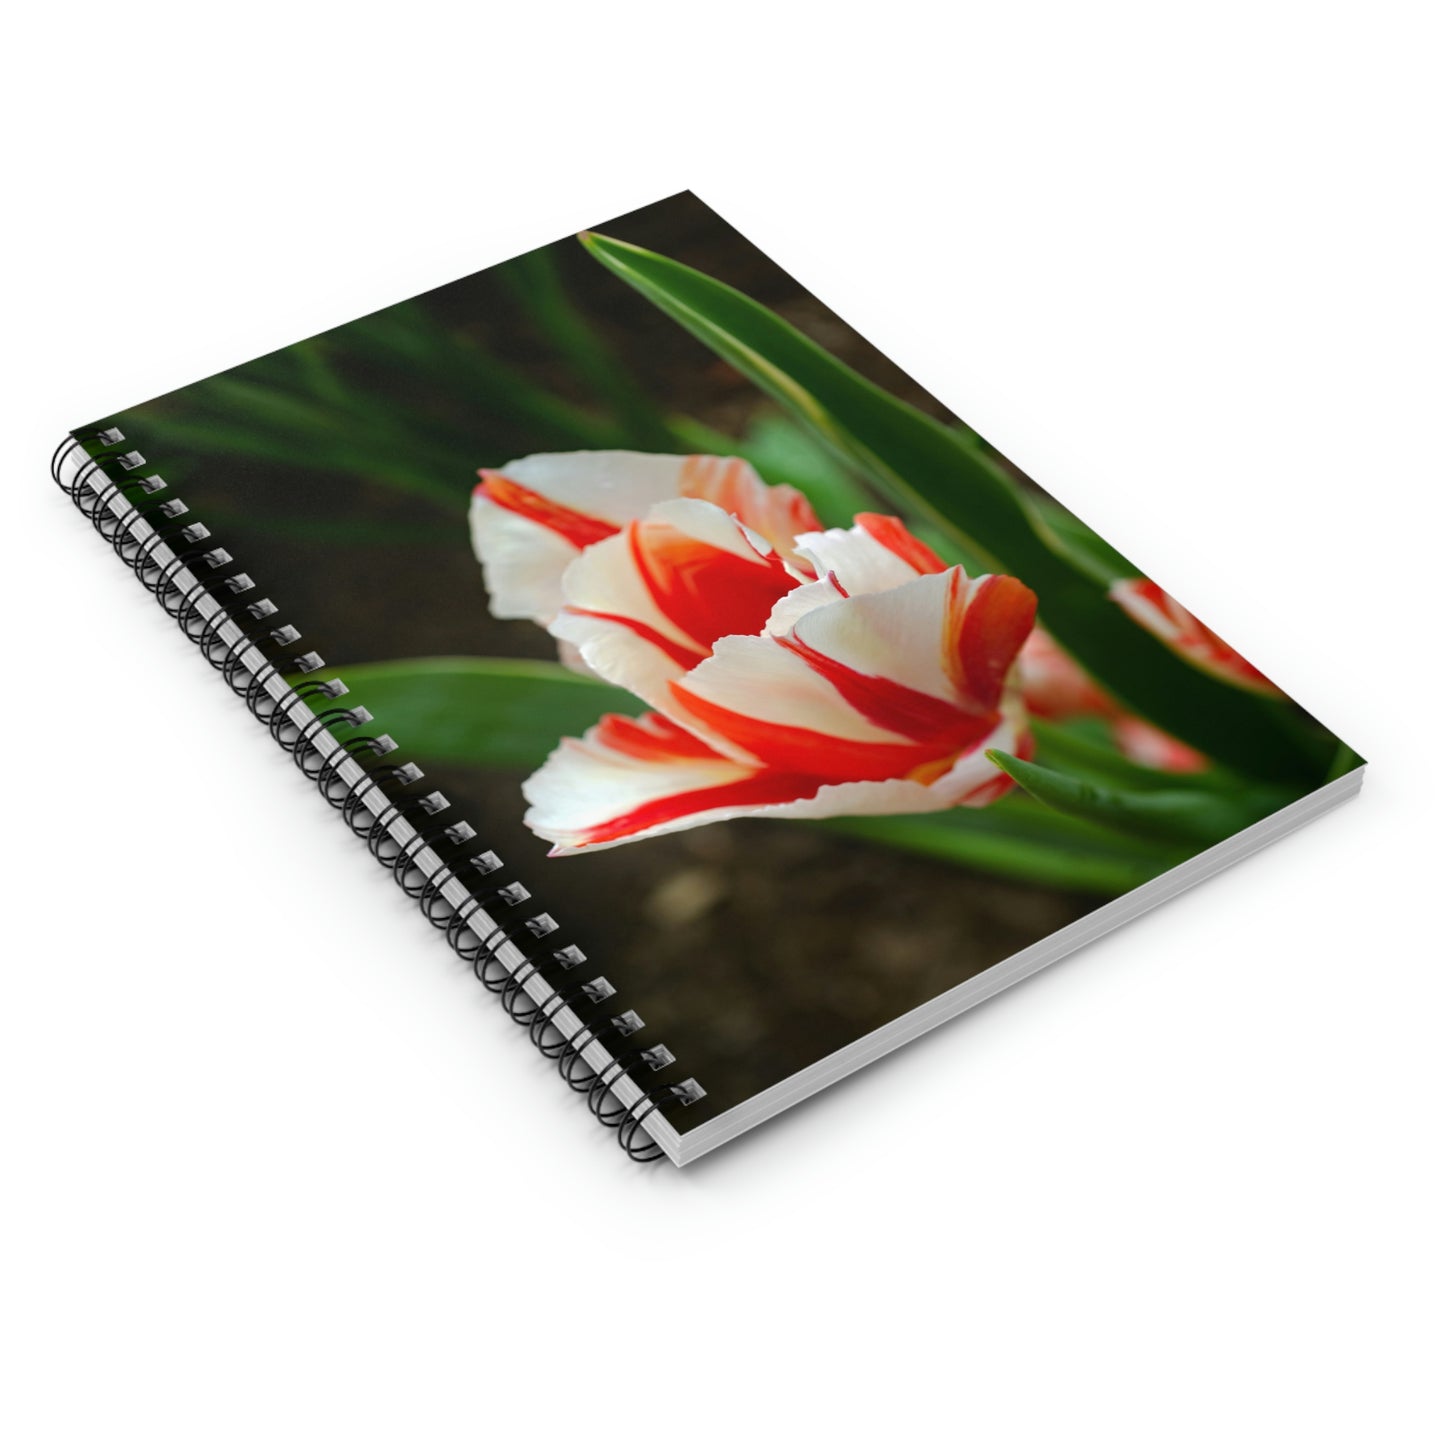 Flowers 06 Spiral Notebook - Ruled Line